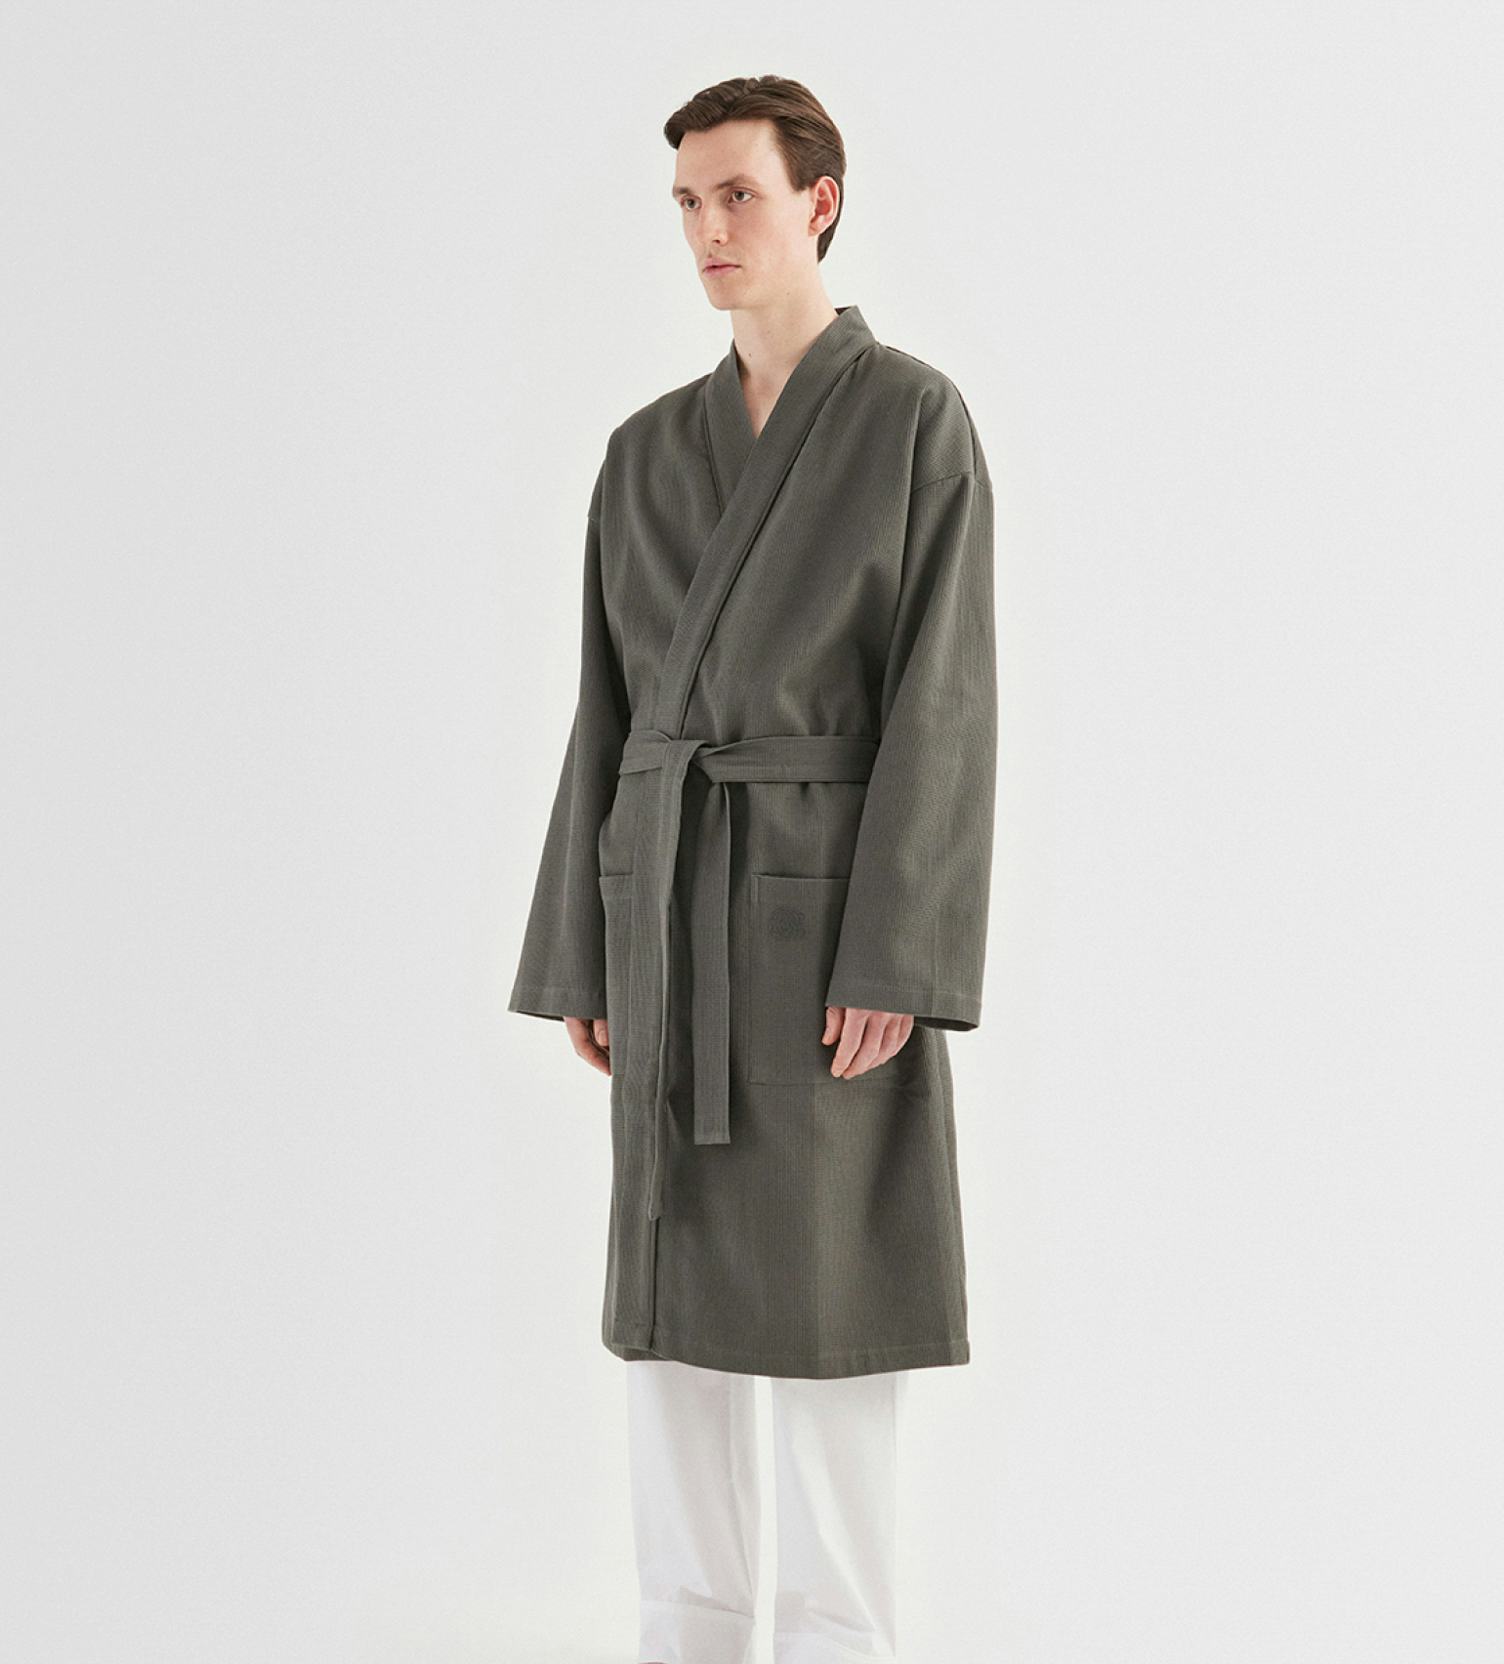 spids blive forkølet Dyrke motion Warm grey kimono with a terry lining. Sheer luxury